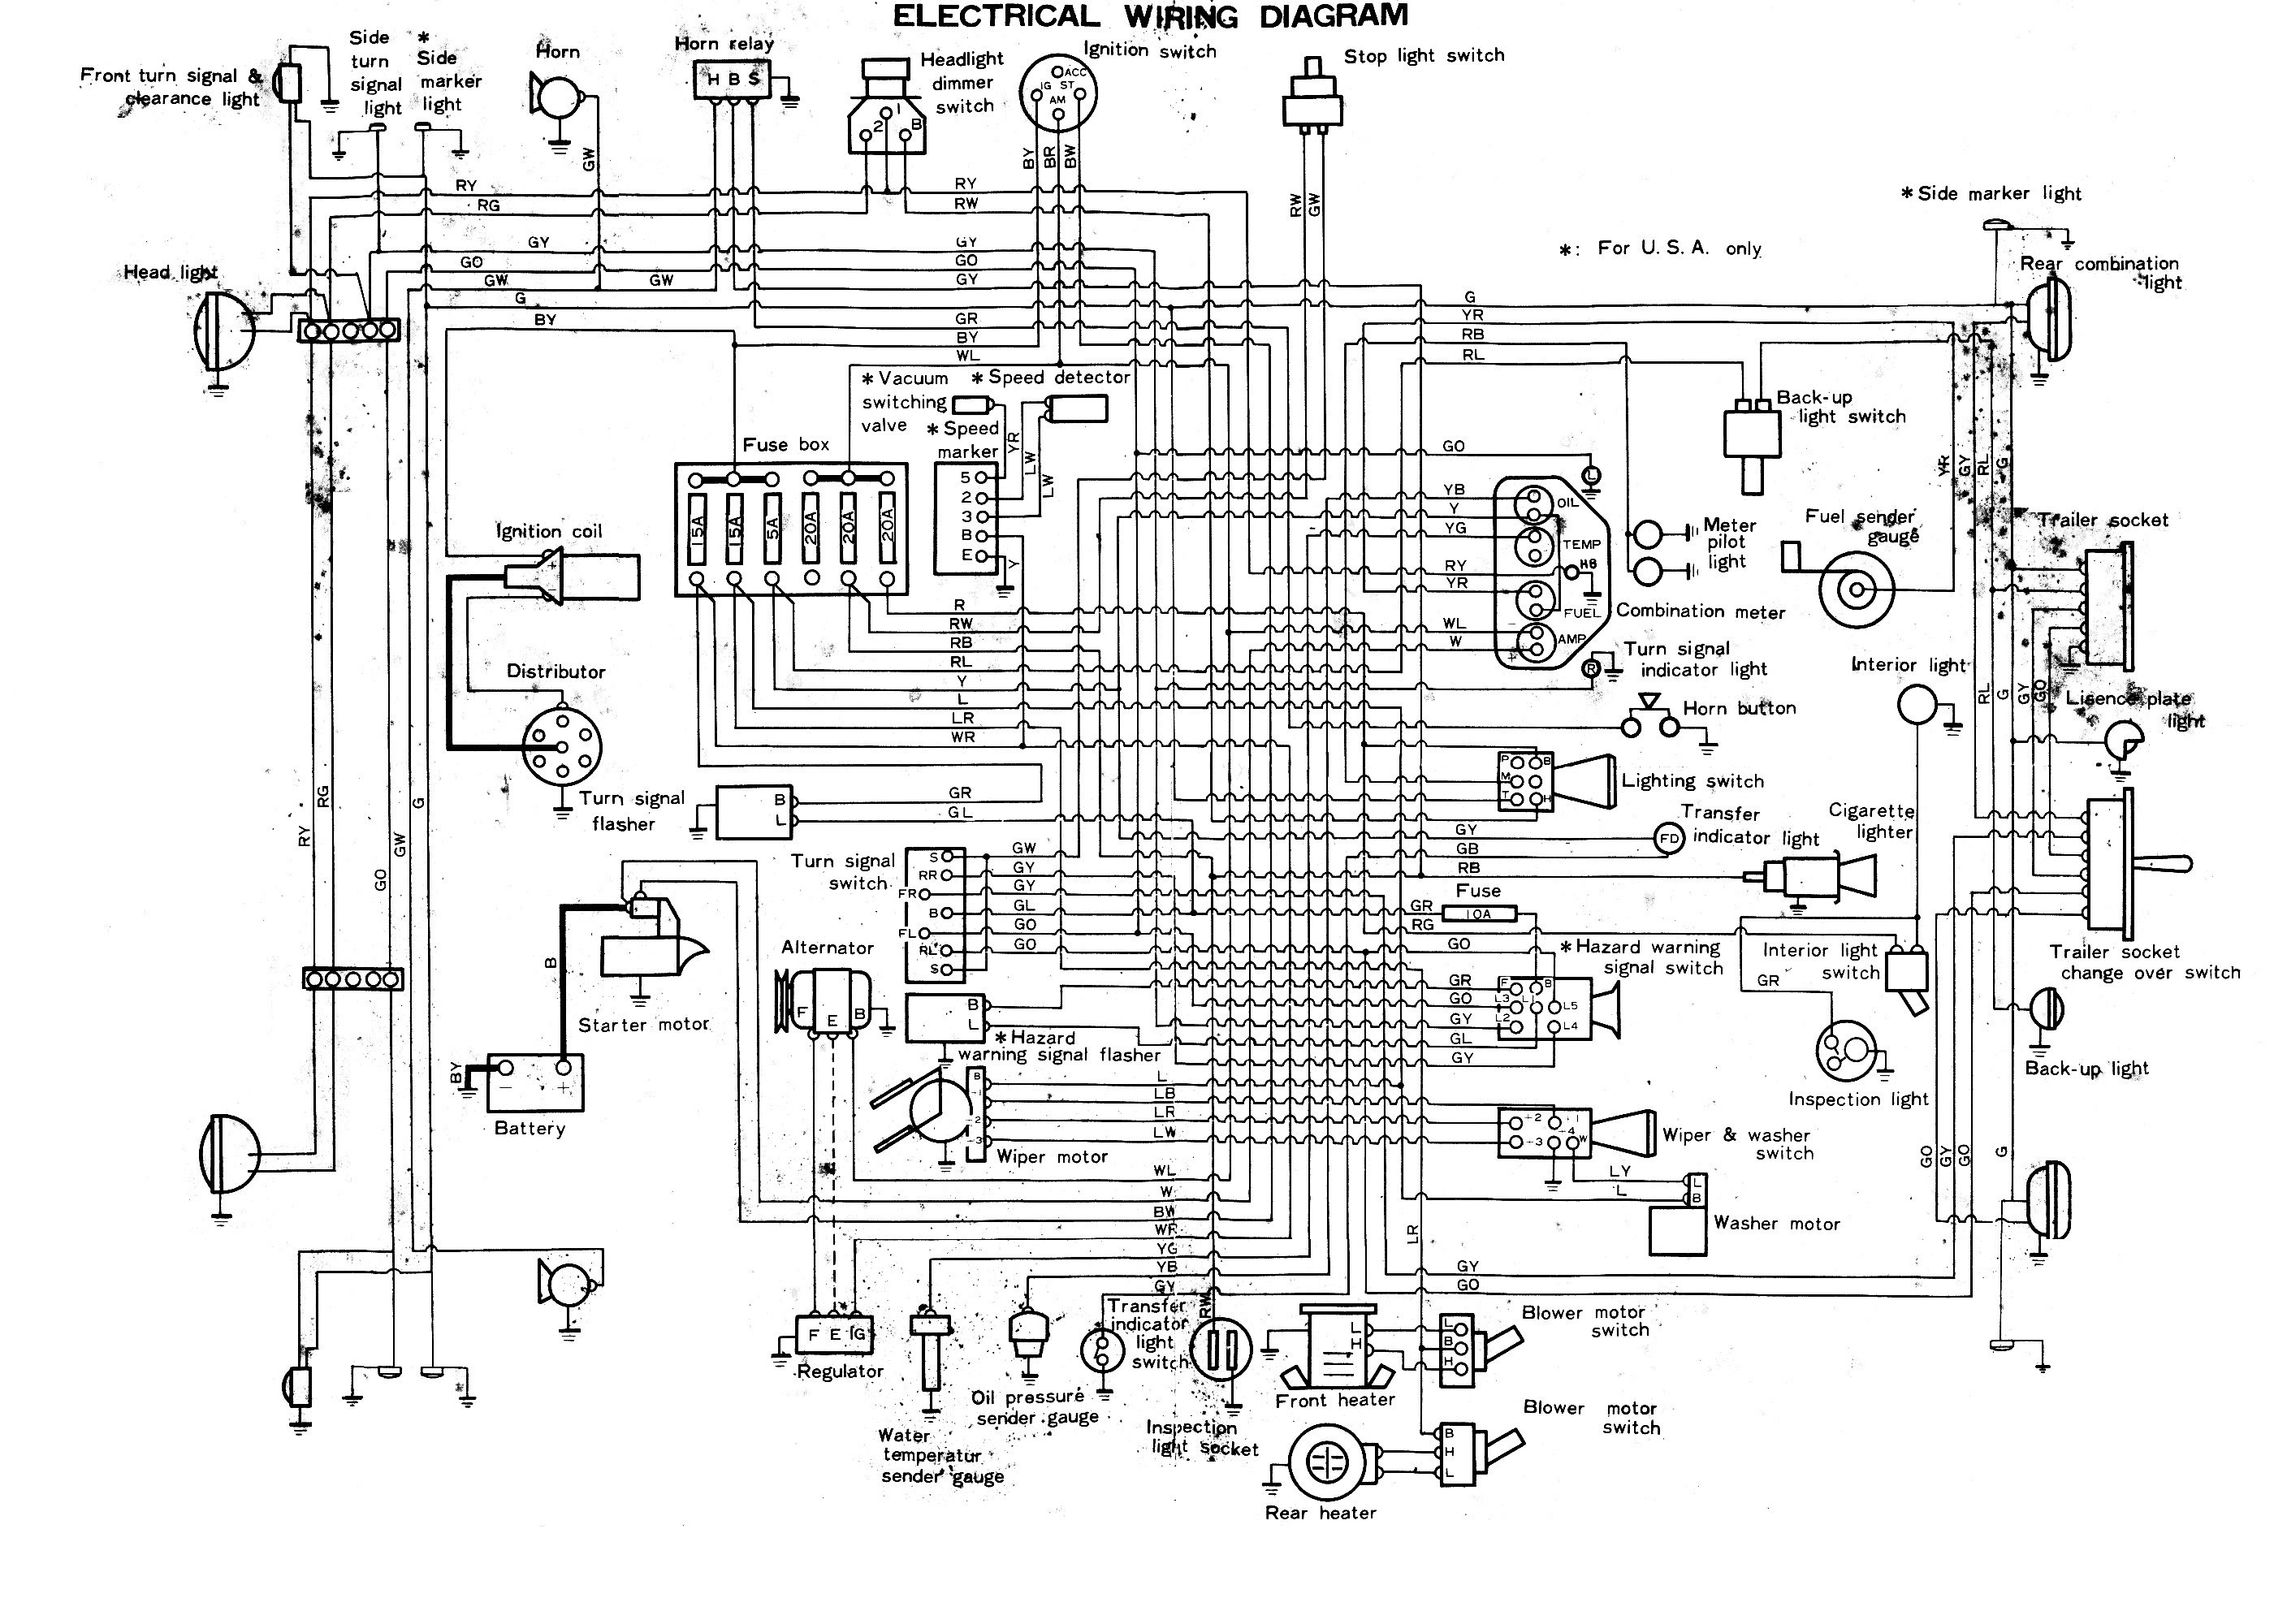 2001 toyota Corolla Engine Diagram 2002 Prius Engine Diagram Another Blog About Wiring Diagram • Of 2001 toyota Corolla Engine Diagram